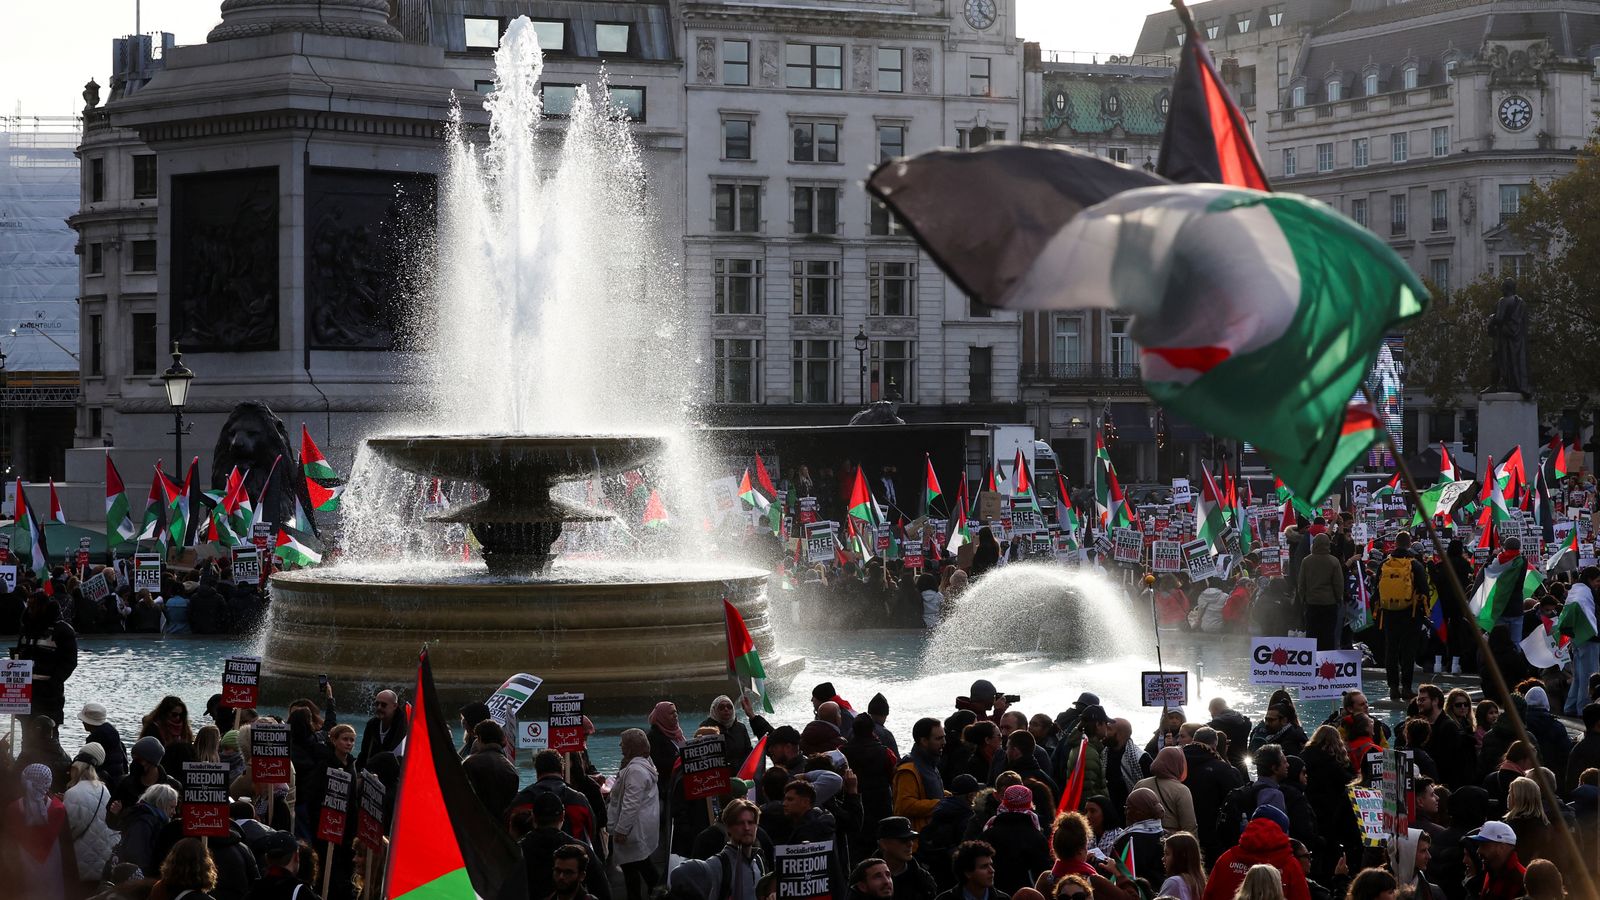 Four police officers injured after pro-Palestinian protesters fire fireworks into crowd